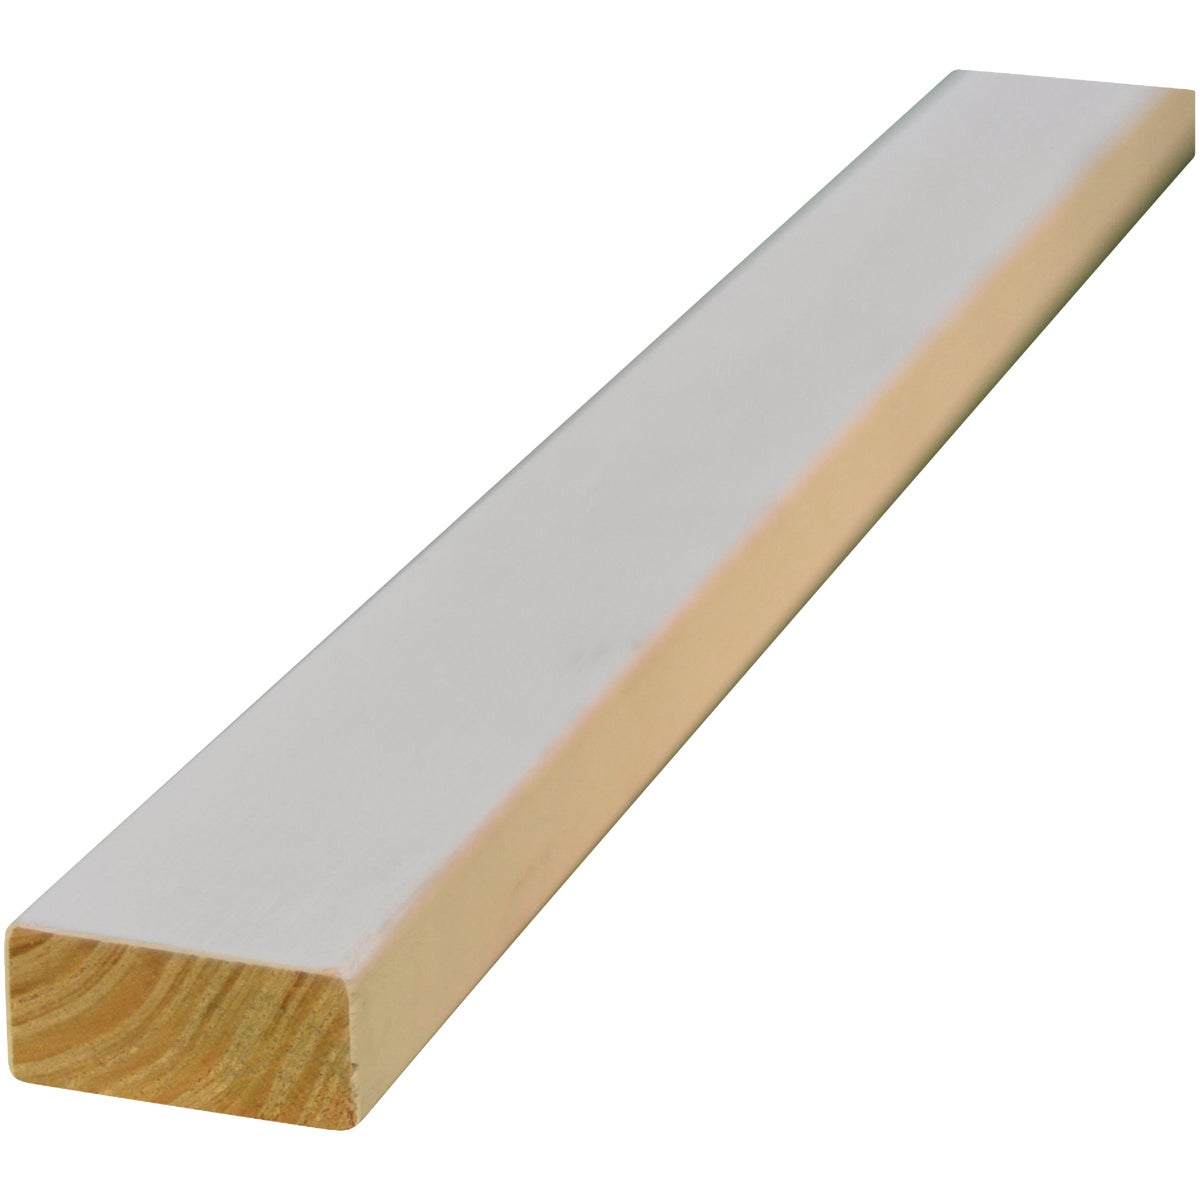 Alexandria Moulding 1 In. W. x 2 In. H. x 8 Ft. L. White Finger Joint Pine Board